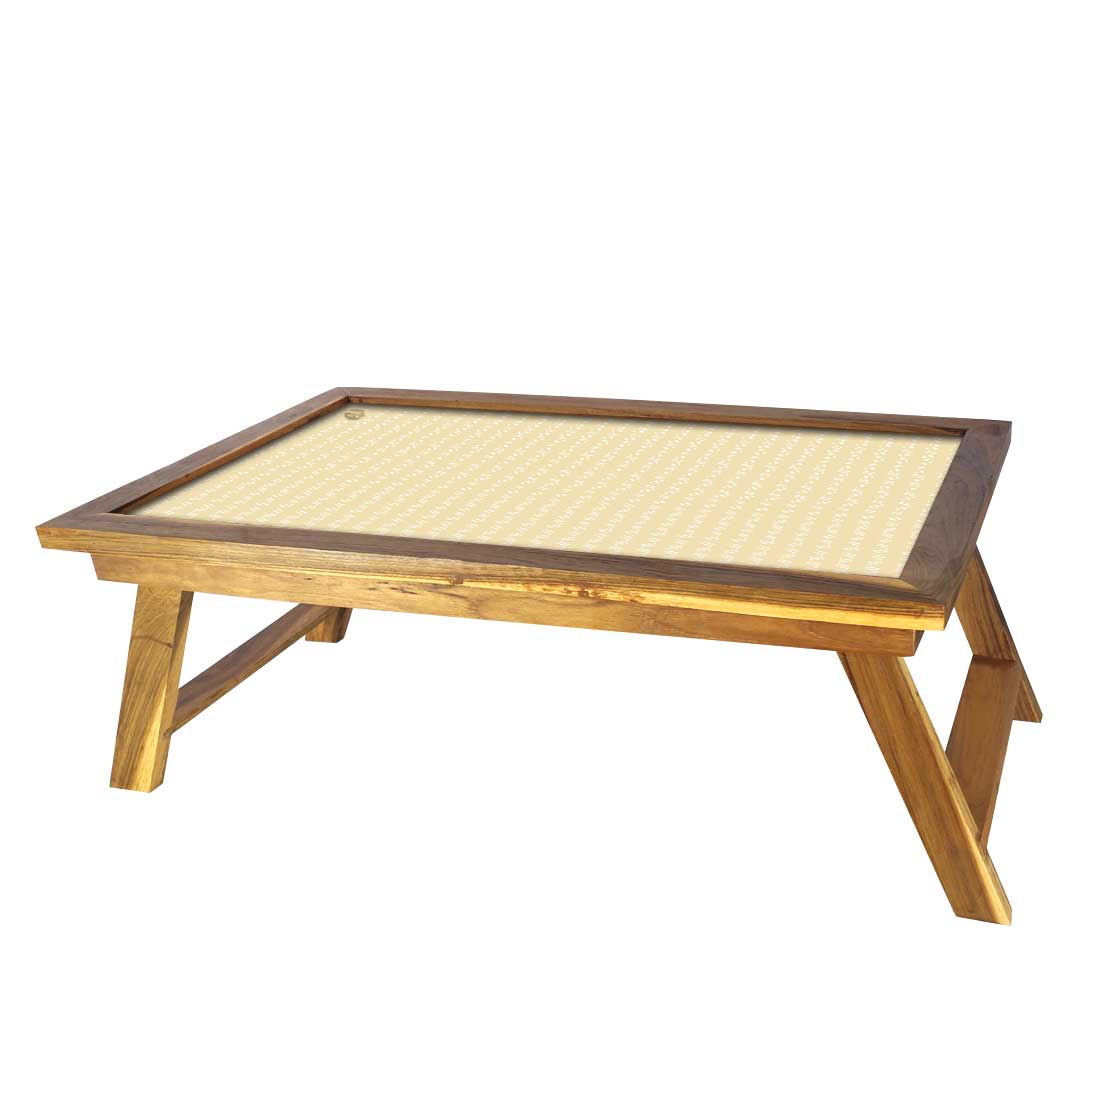 Foldable Bed Table for Bedroom Breakfast Tables Study Desk - Yellow Shade Nutcase